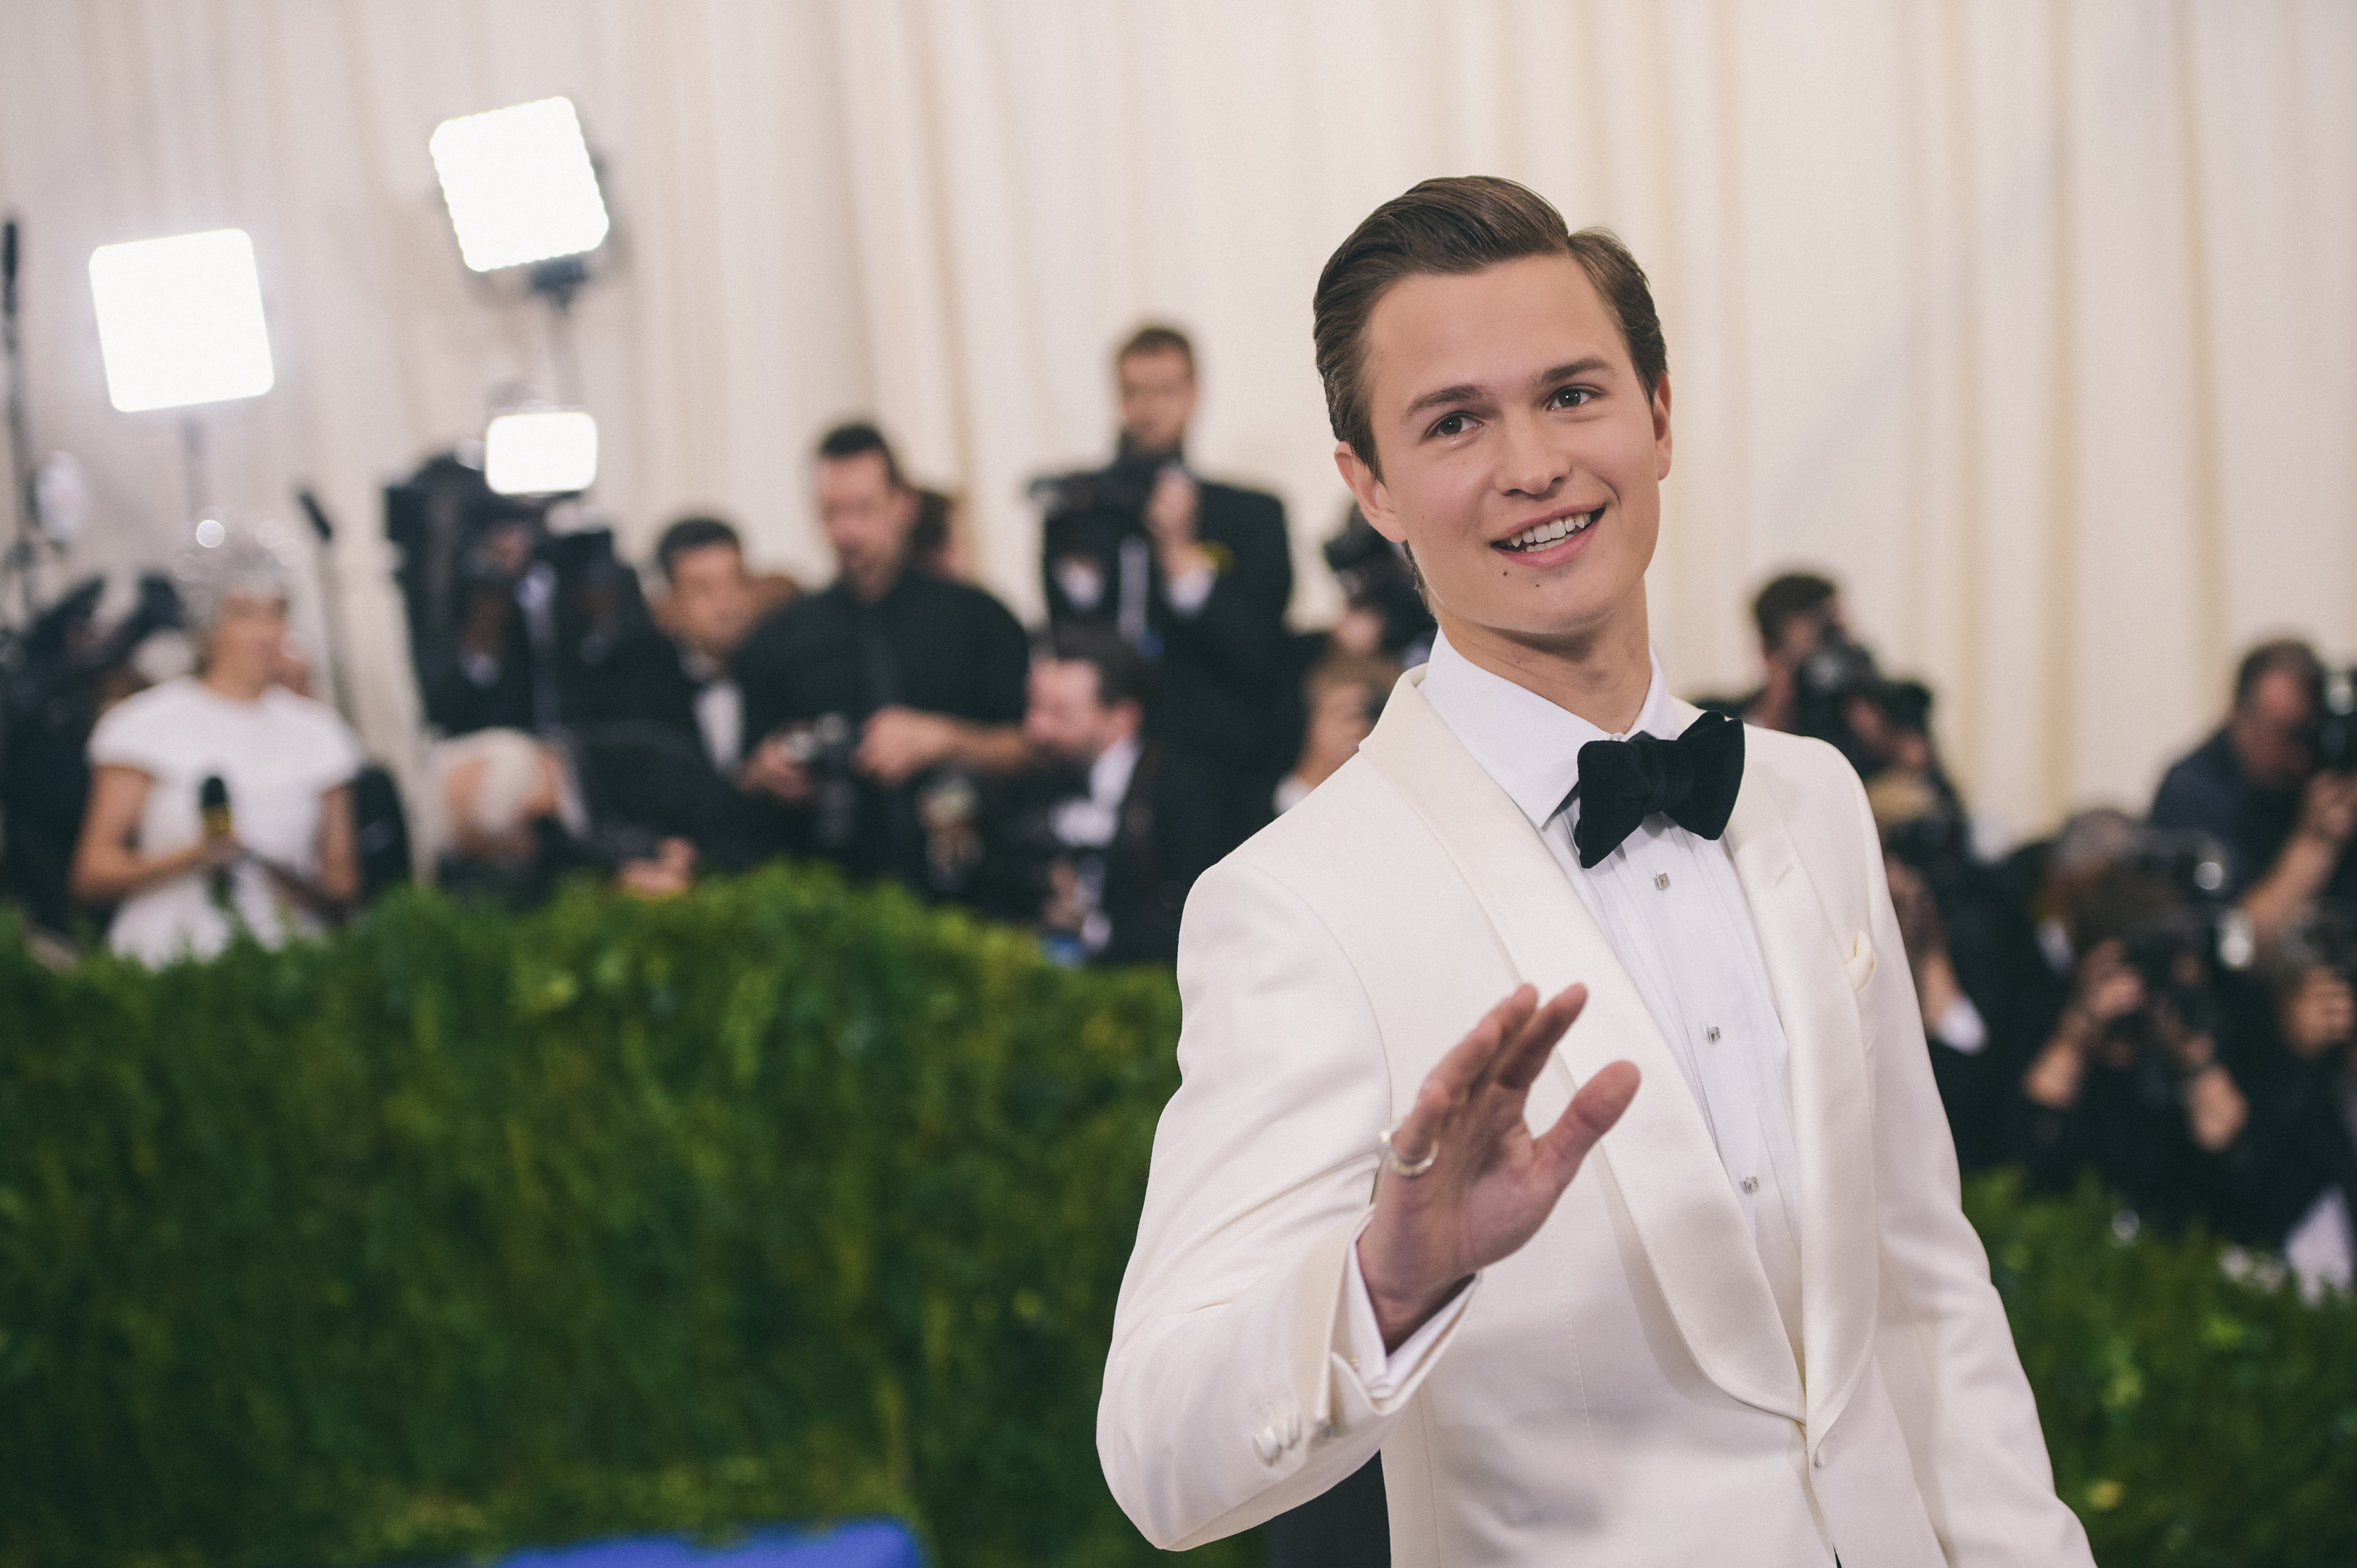 Ansel Elgort attends the Costume Institute Gala at Metropolitan Museum of Art on May 1, 2017 in New York City. (J. Kempin—Getty Images)